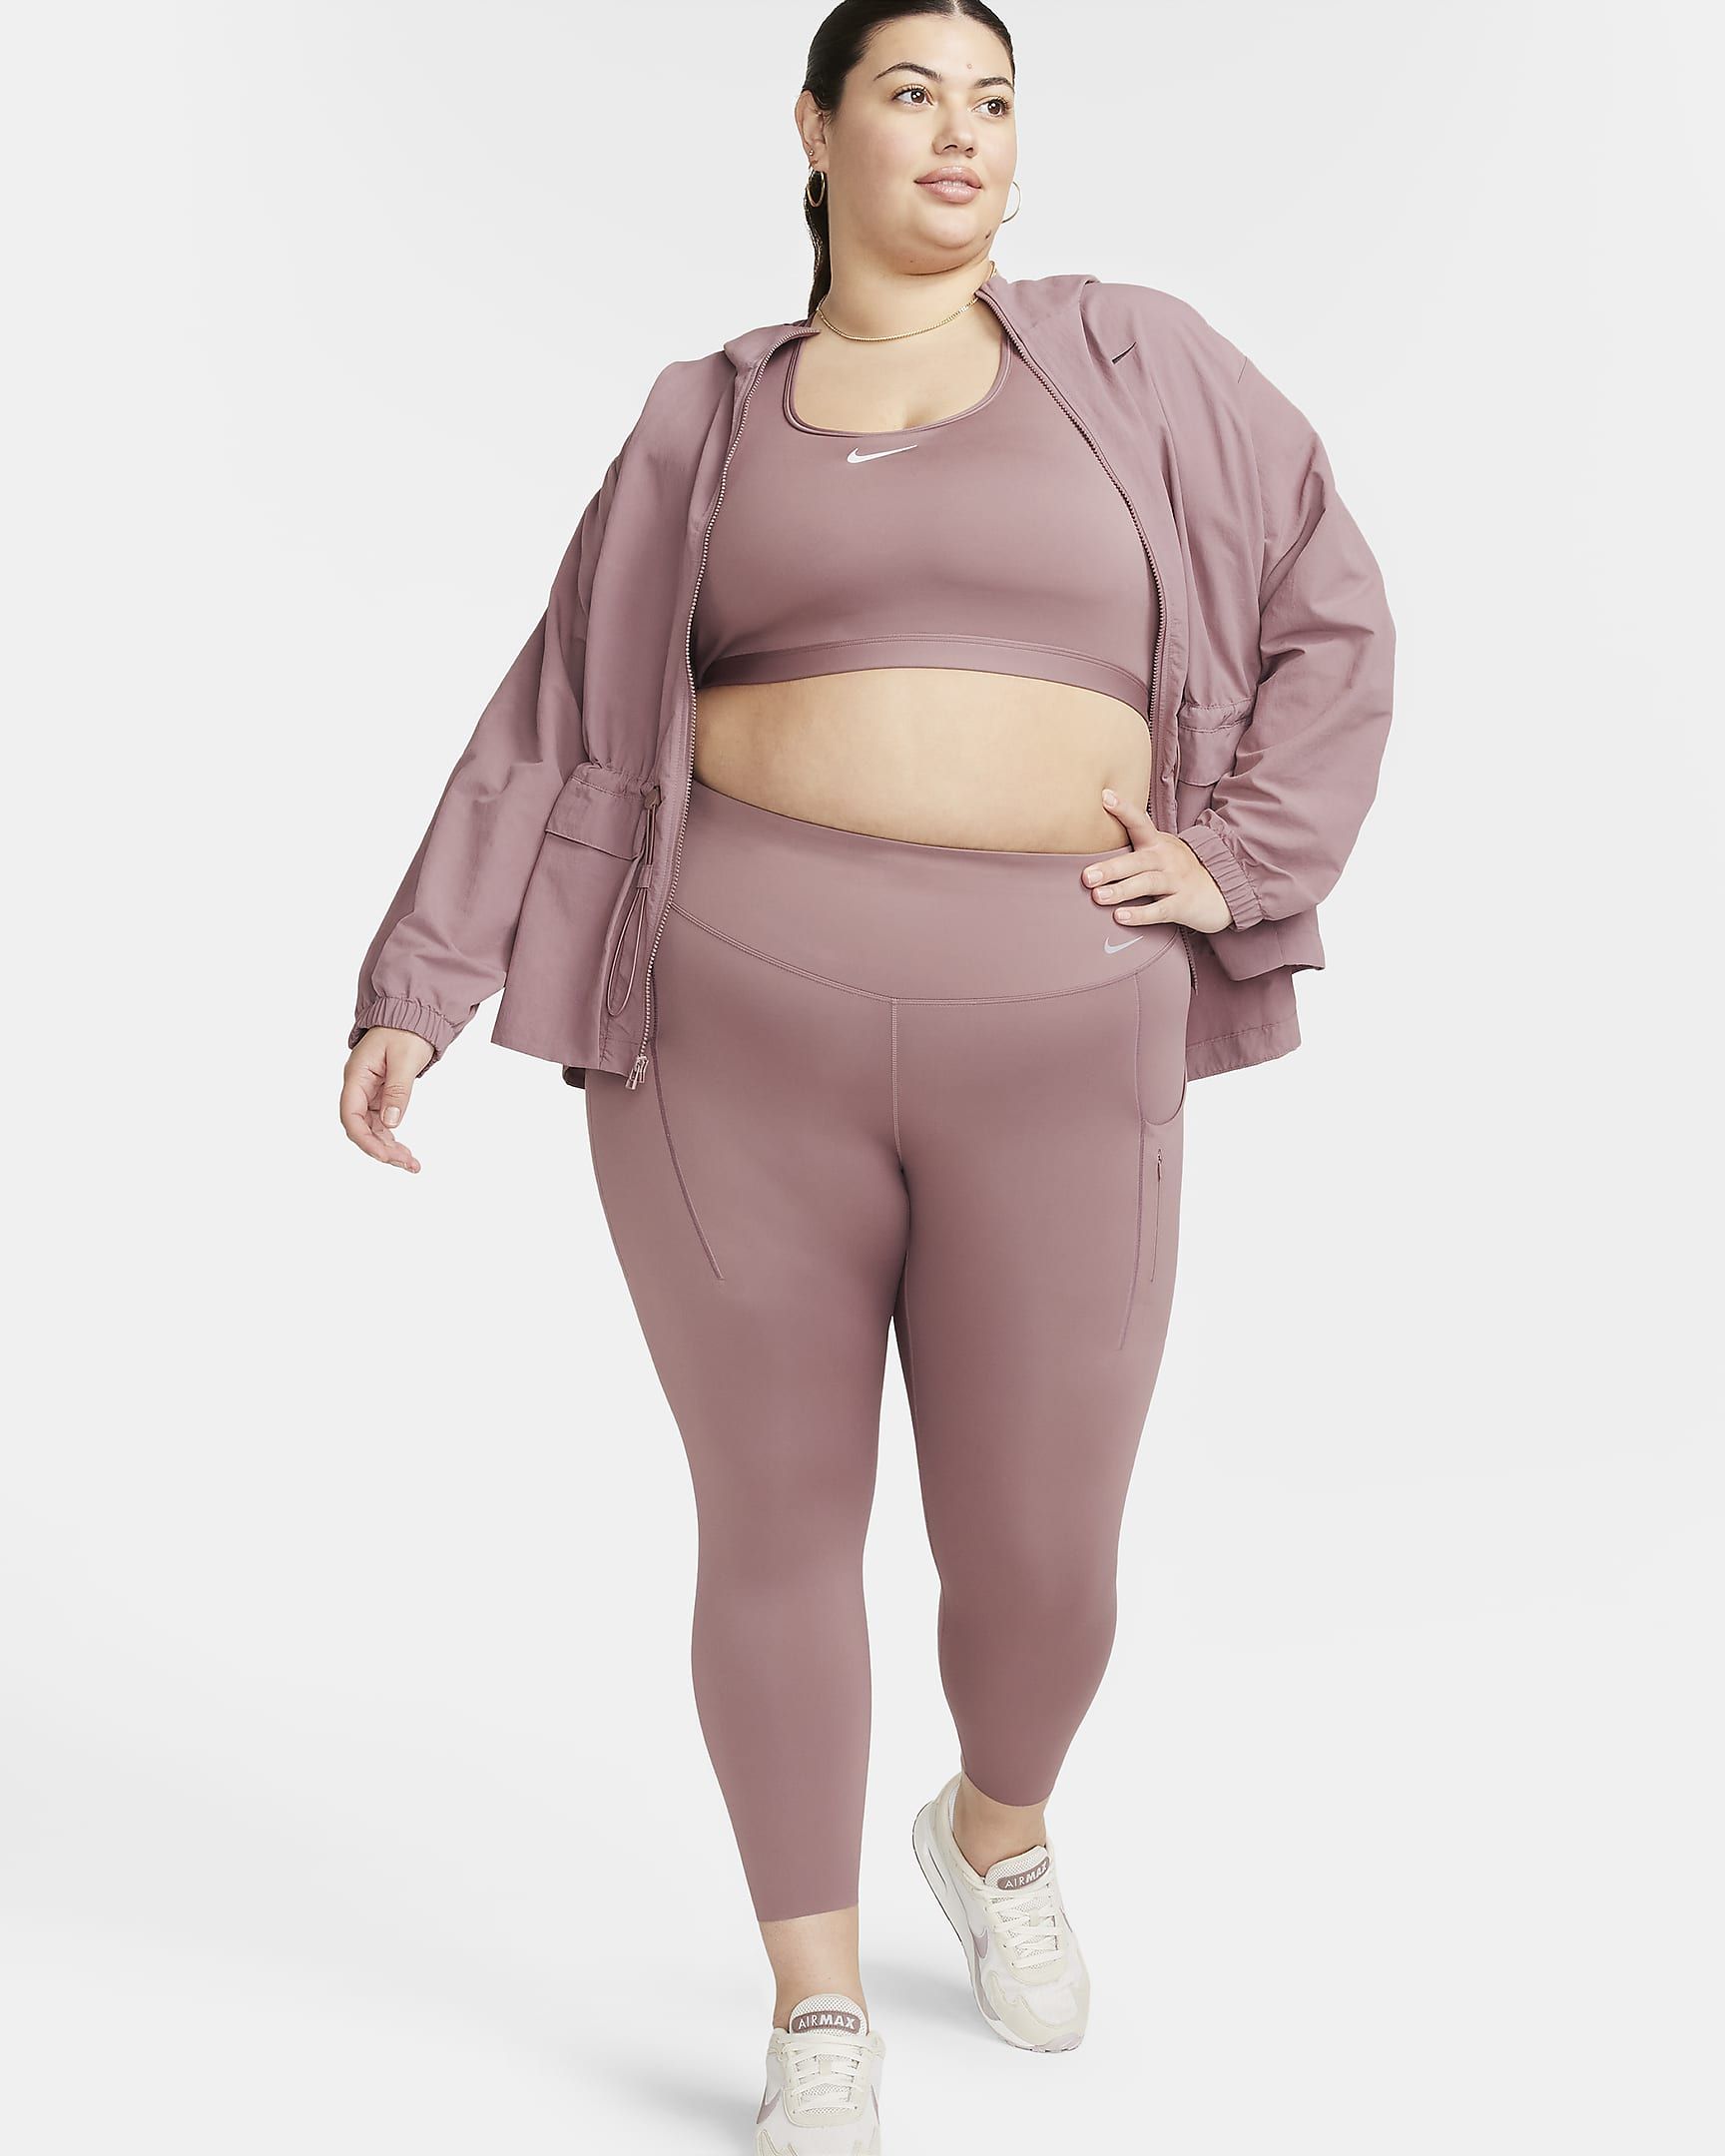 Nike Go Women's Firm-Support High-Waisted 7/8 Leggings with Pockets (Plus Size). Nike.com | Nike (US)